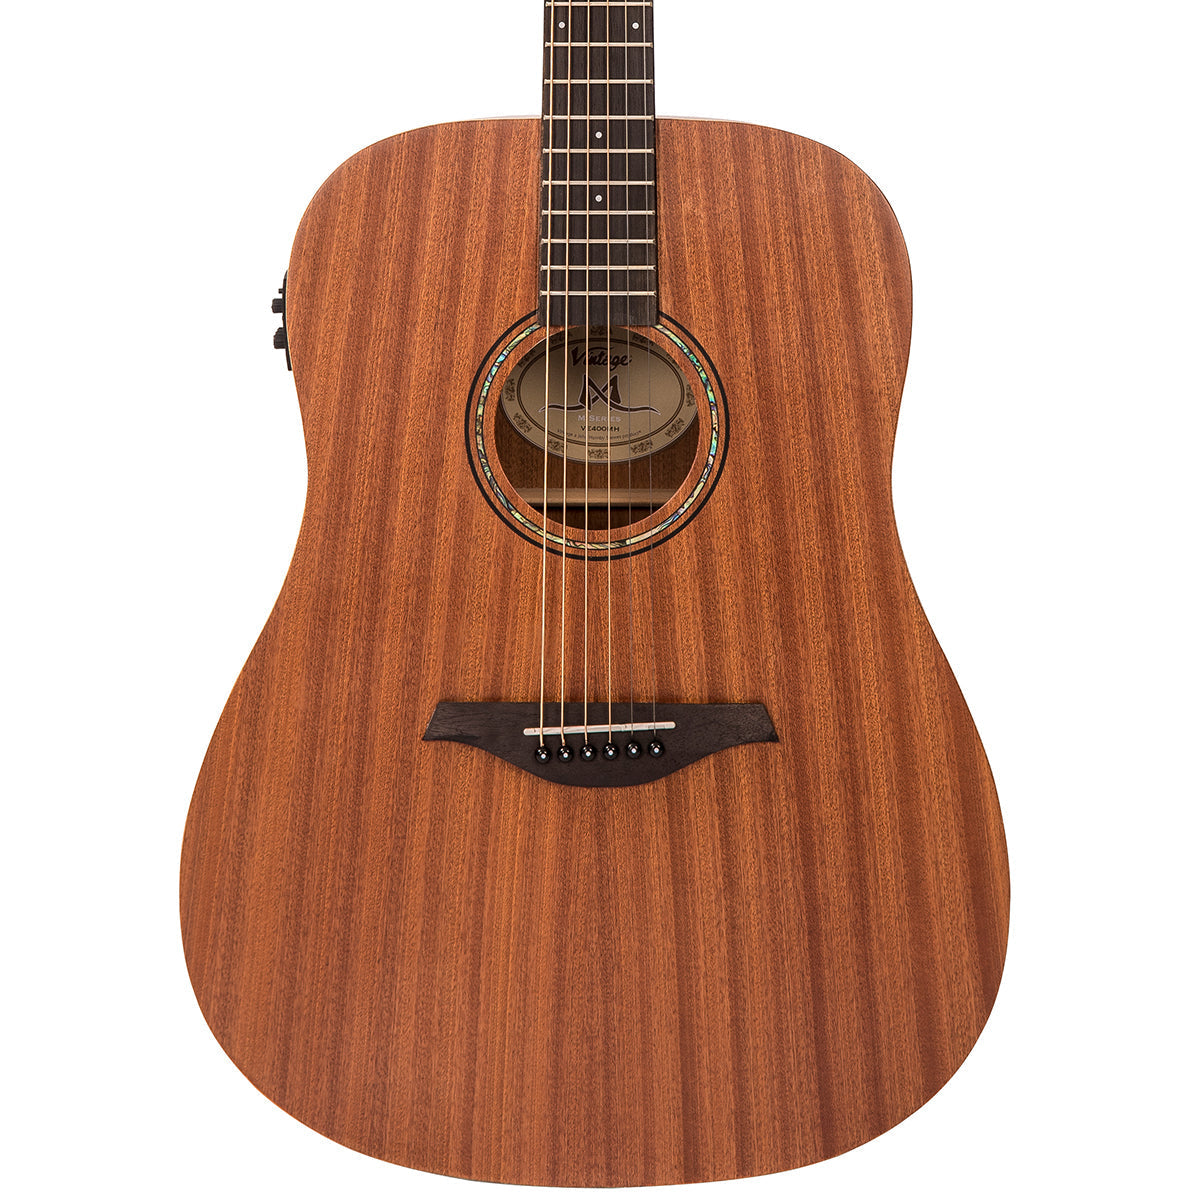 Vintage Mahogany Series 'Dreadnought' Electro-Acoustic Guitar ~ Satin Mahogany, Electric Acoustic Guitars for sale at Richards Guitars.